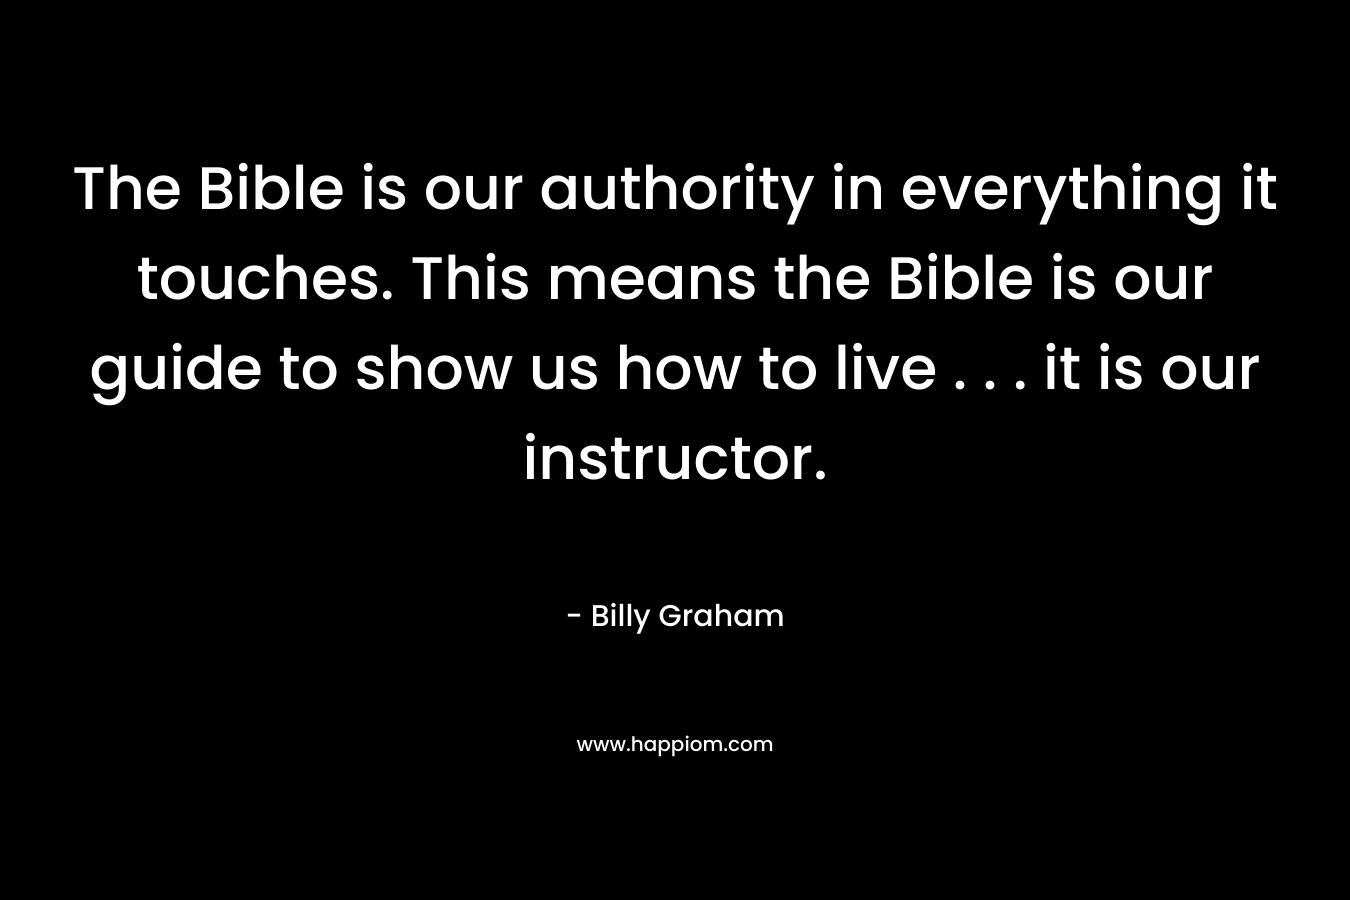 The Bible is our authority in everything it touches. This means the Bible is our guide to show us how to live . . . it is our instructor.